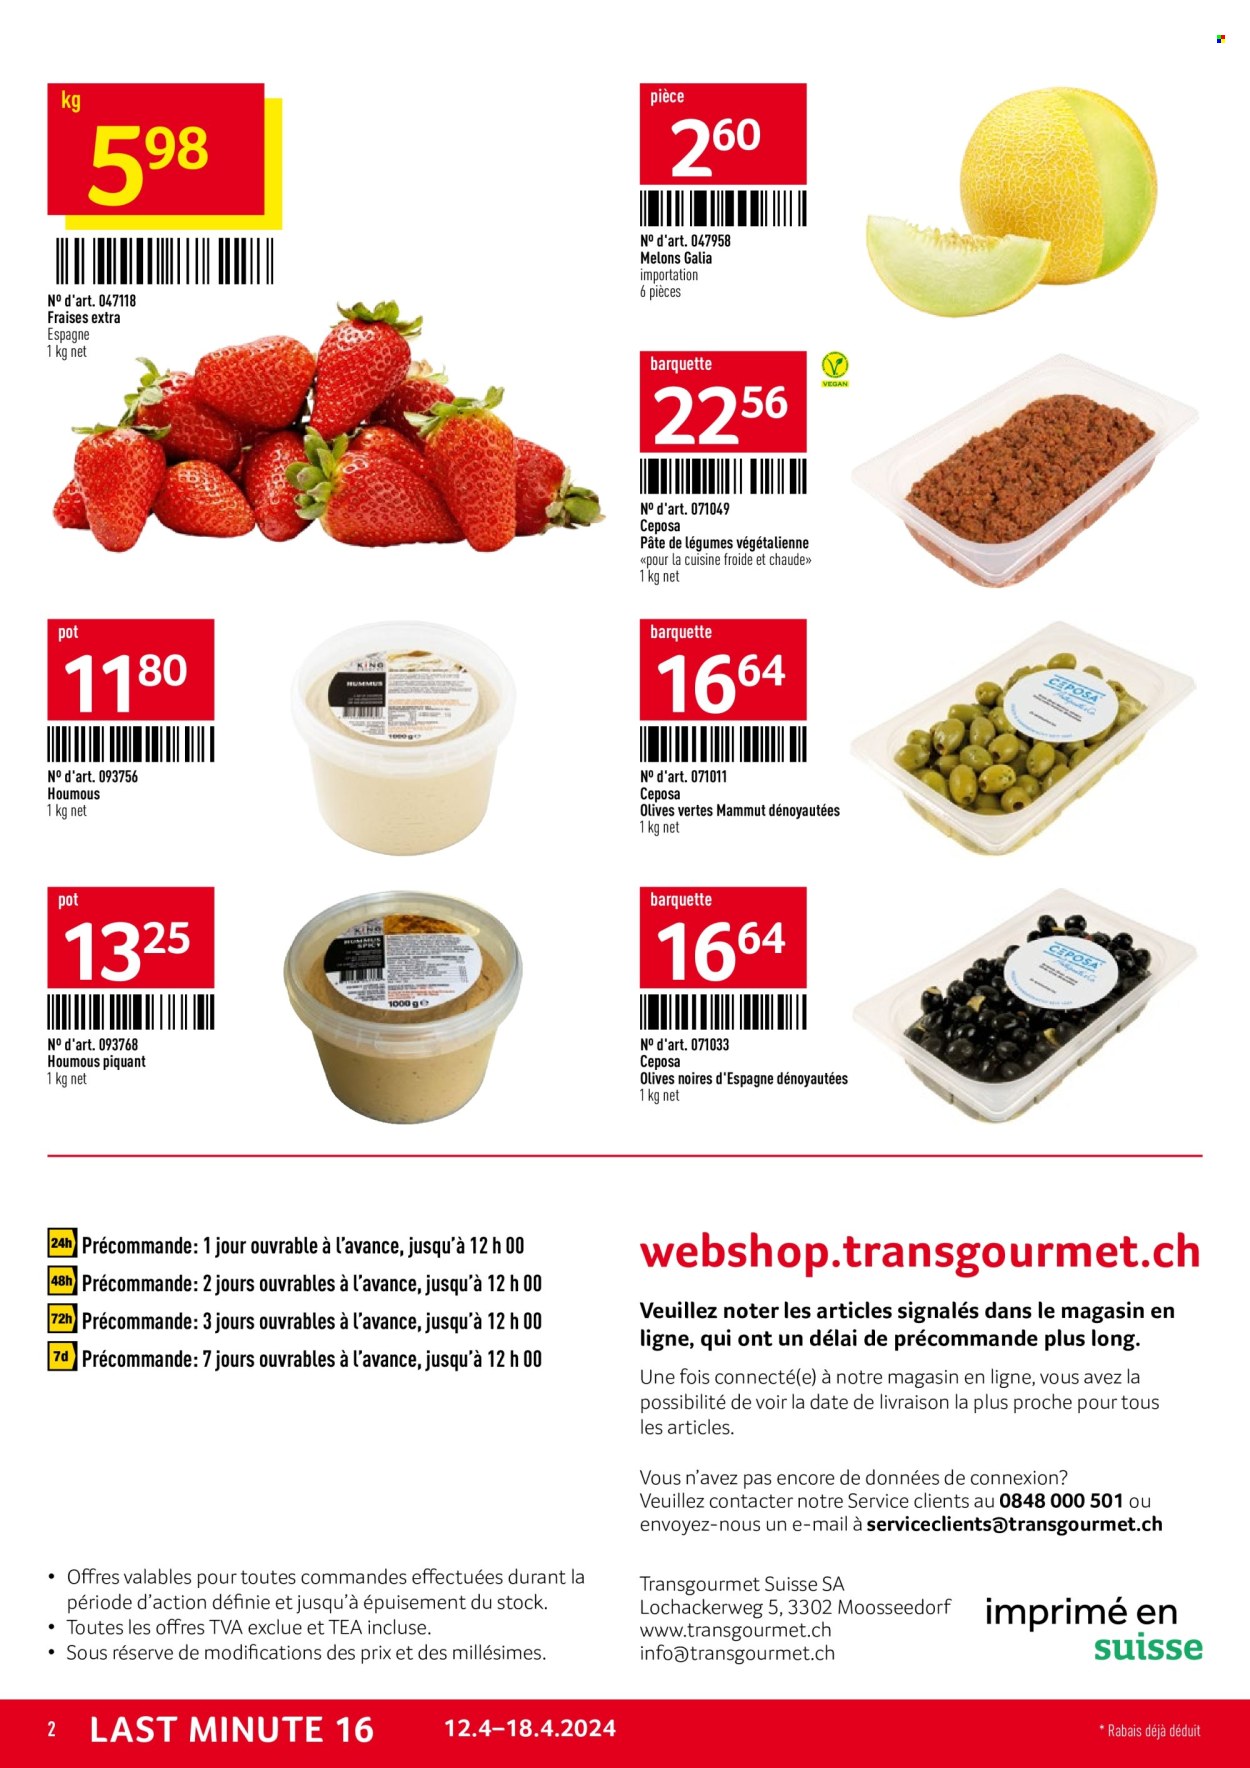 Catalogue TransGourmet - 12.4.2024 - 18.4.2024. Page 2.